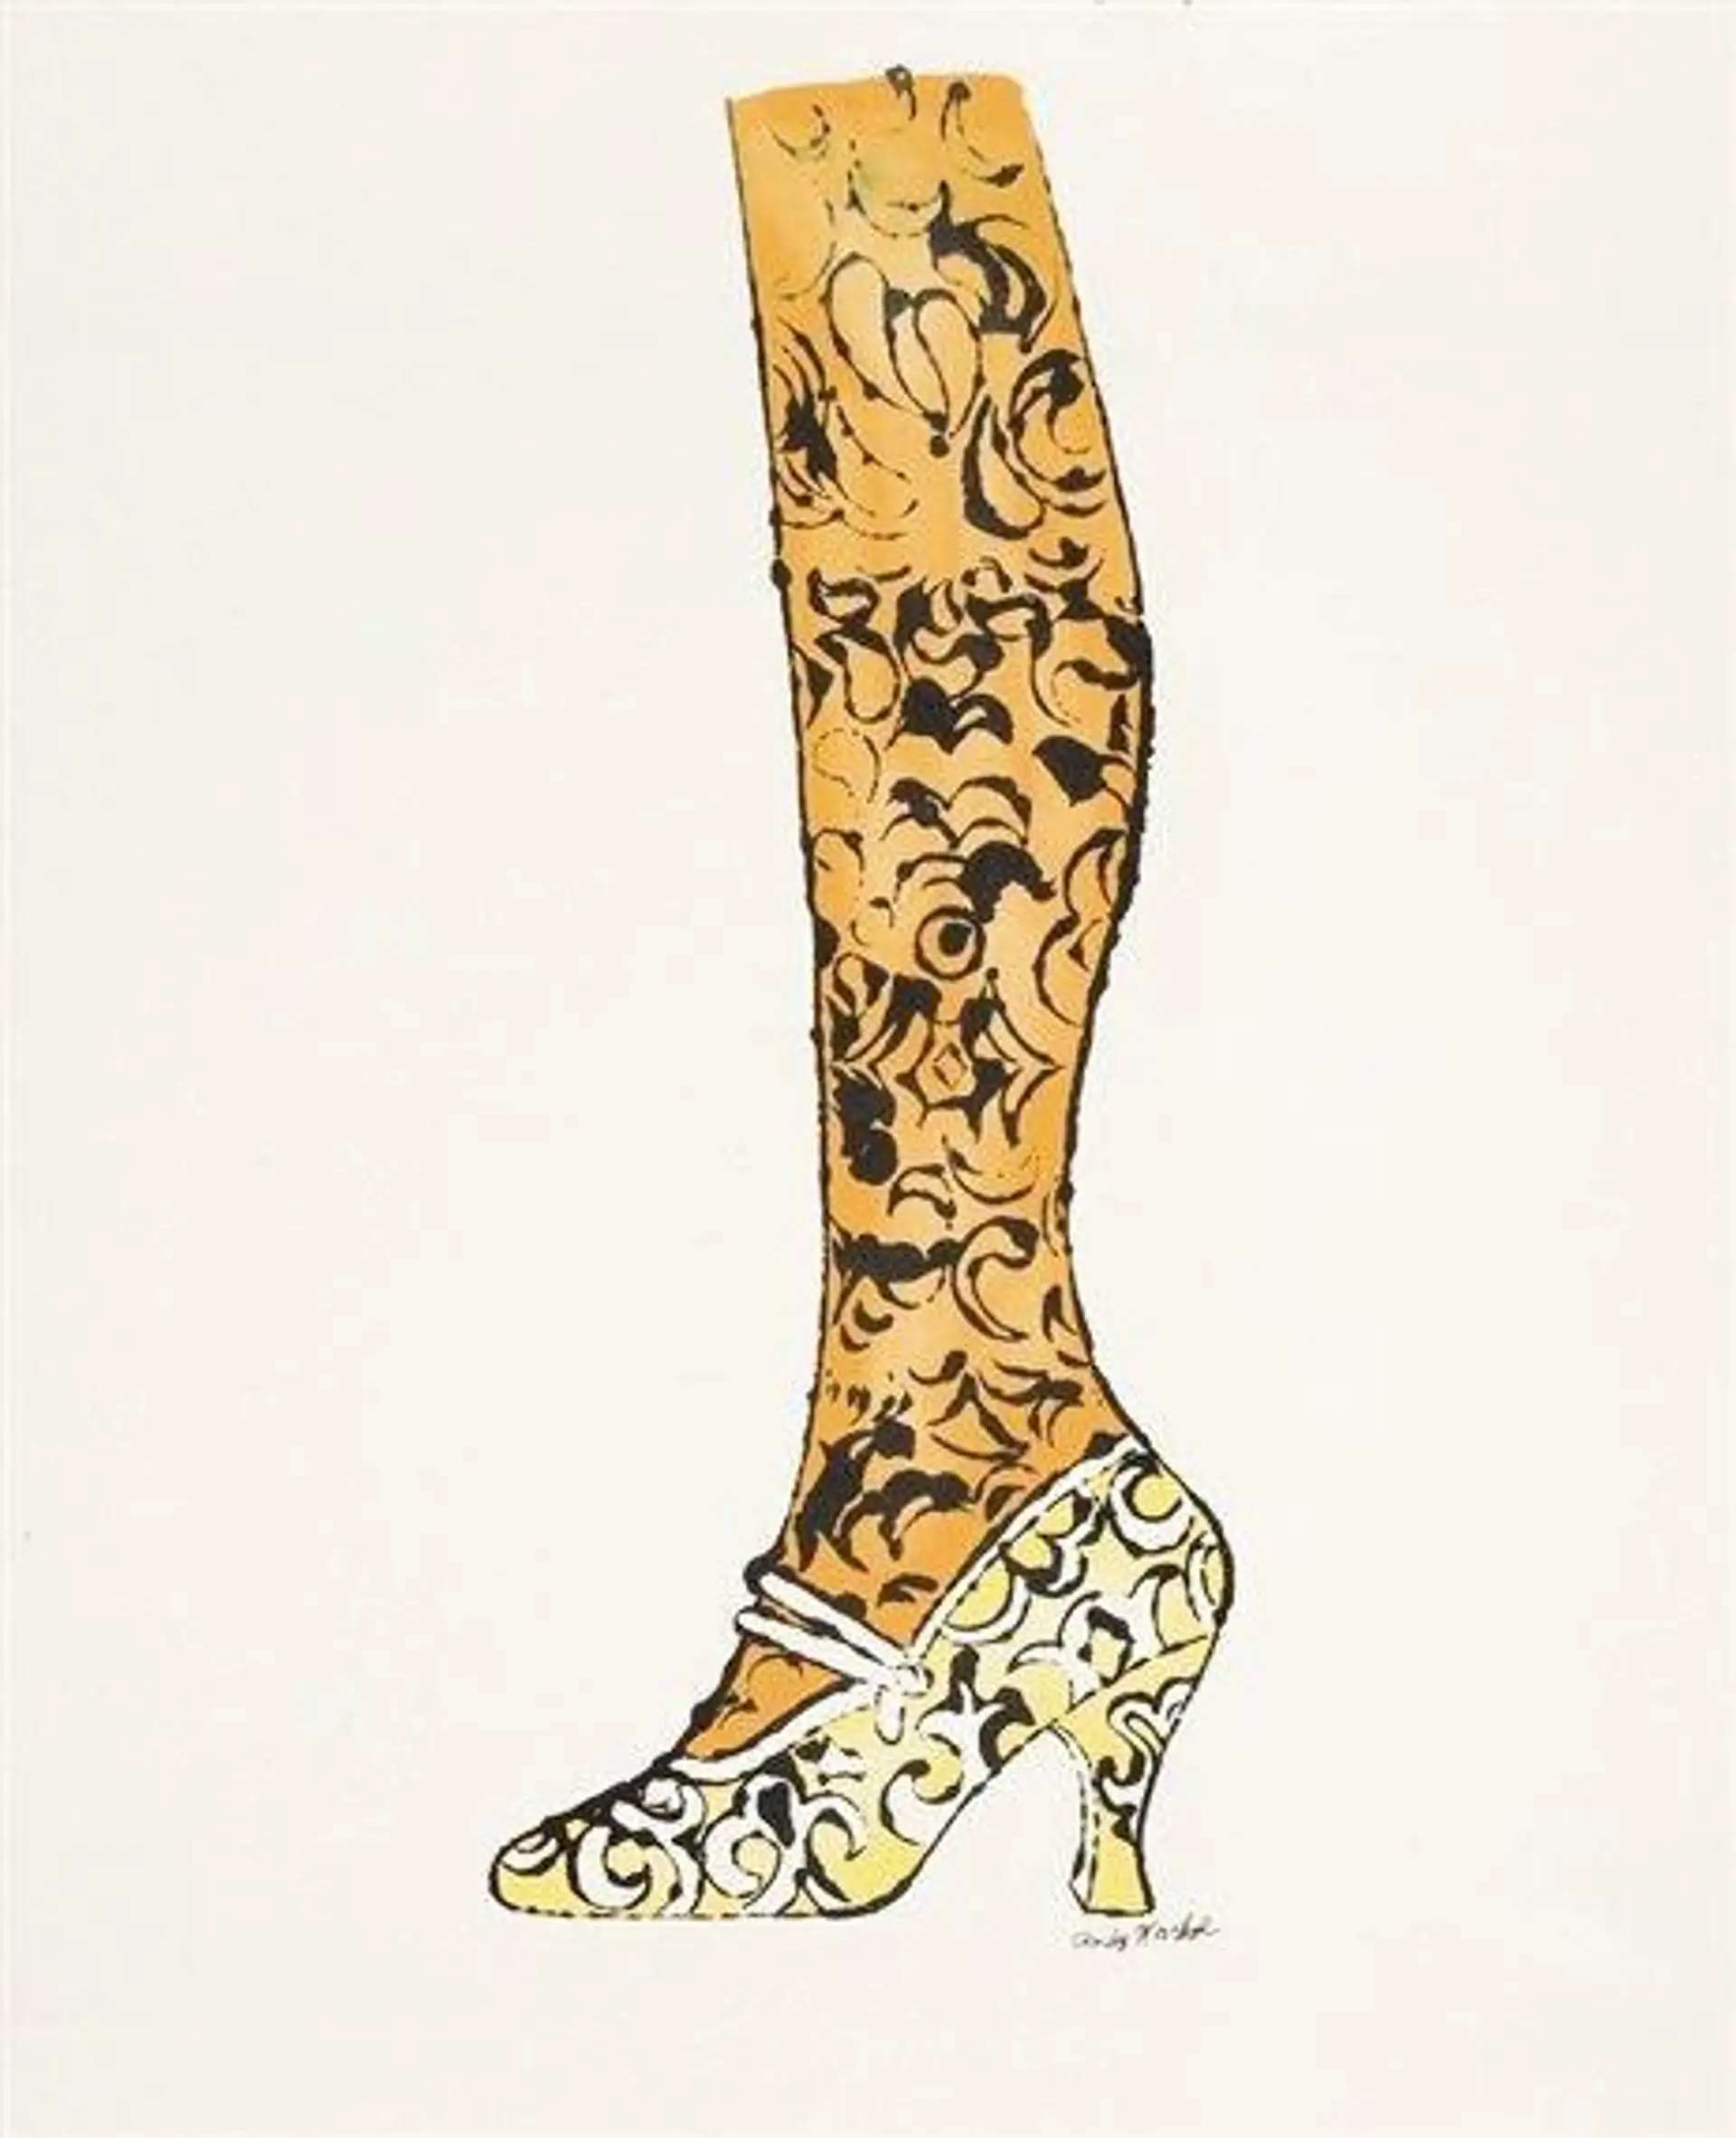 Shoe And Leg by Andy Warhol